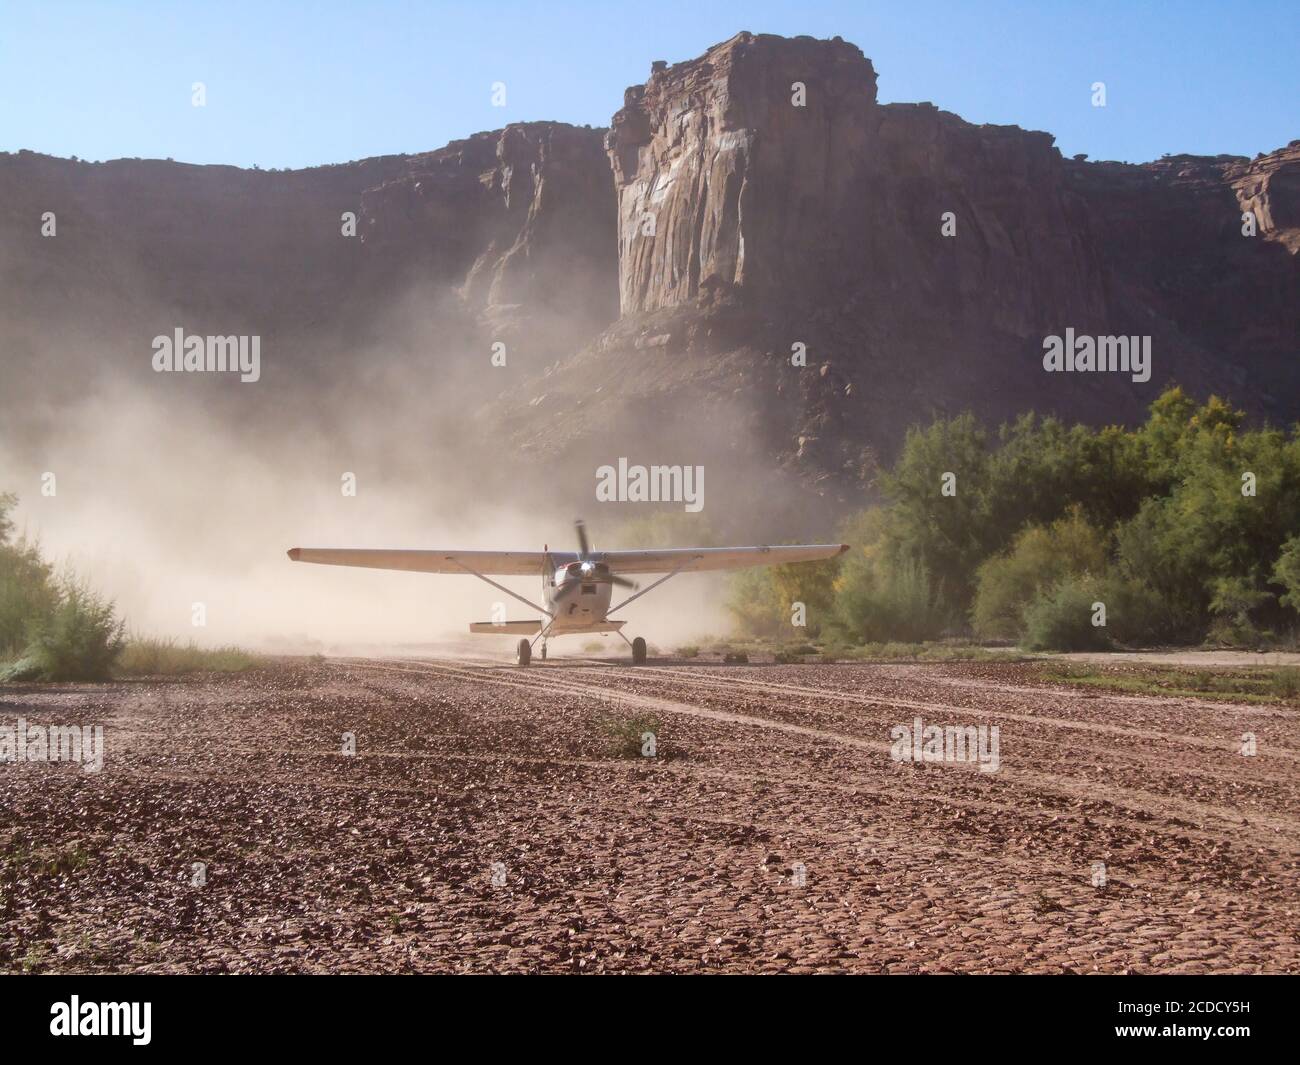 A Cessna 185 Skywagon of the Utah Backcountry Pilots Association lands on the Mineral Bottom airstrip in Labyrinth Canyon near Moab, Utah. Stock Photo